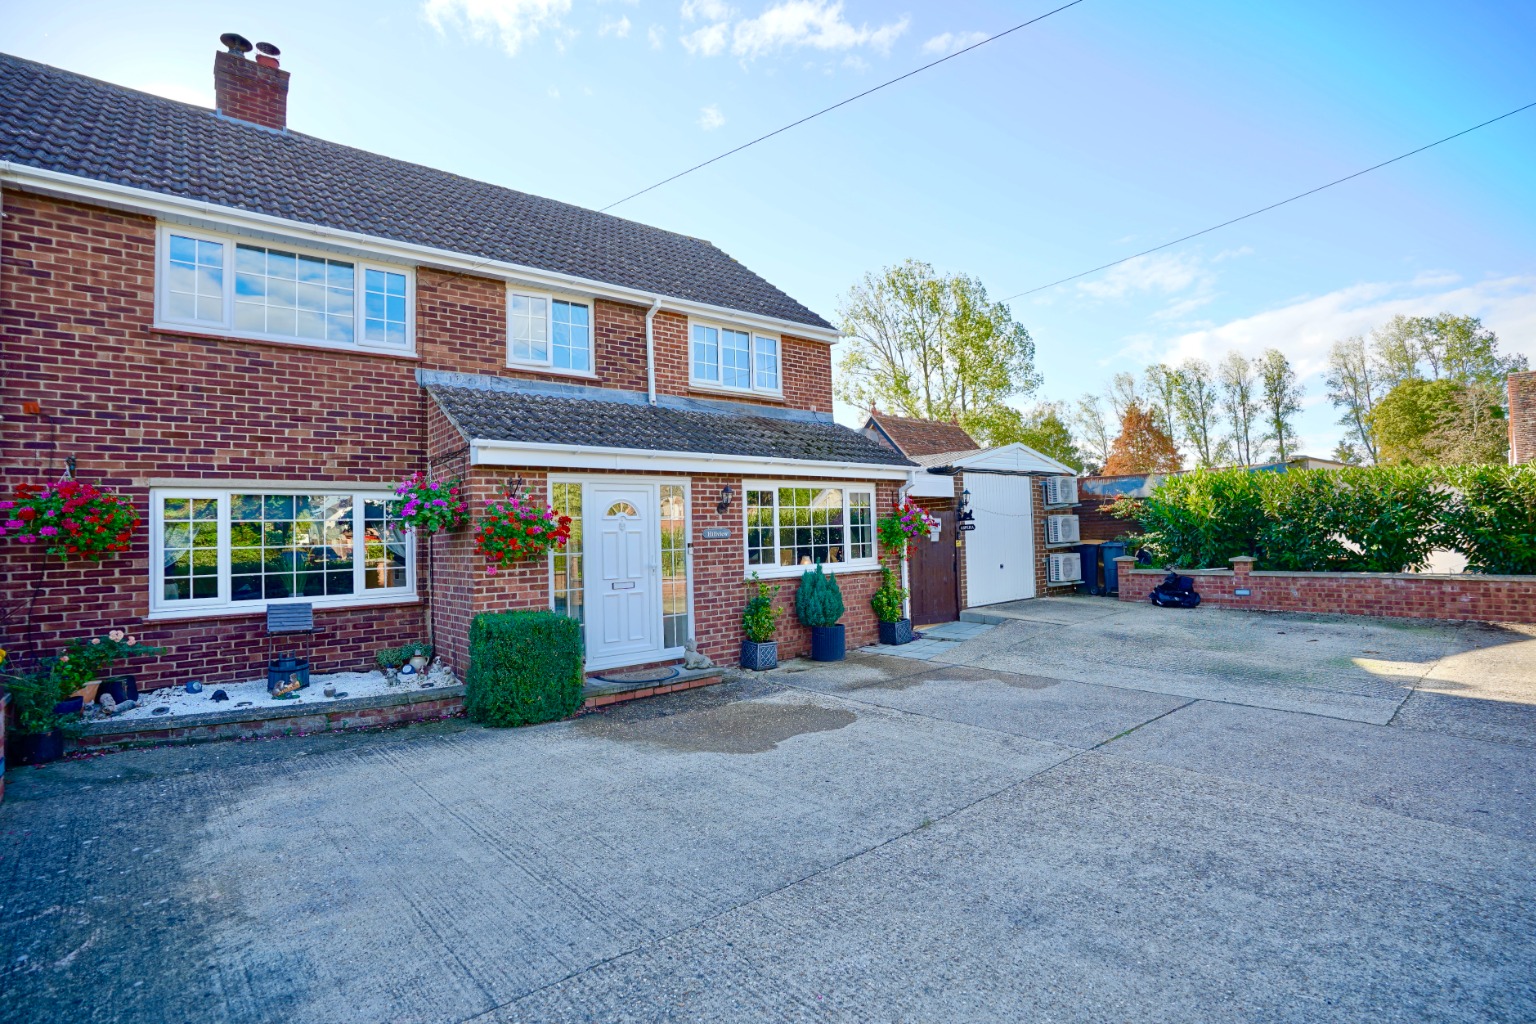 4 bed semi-detached house for sale in Church Road, Bedford, MK44